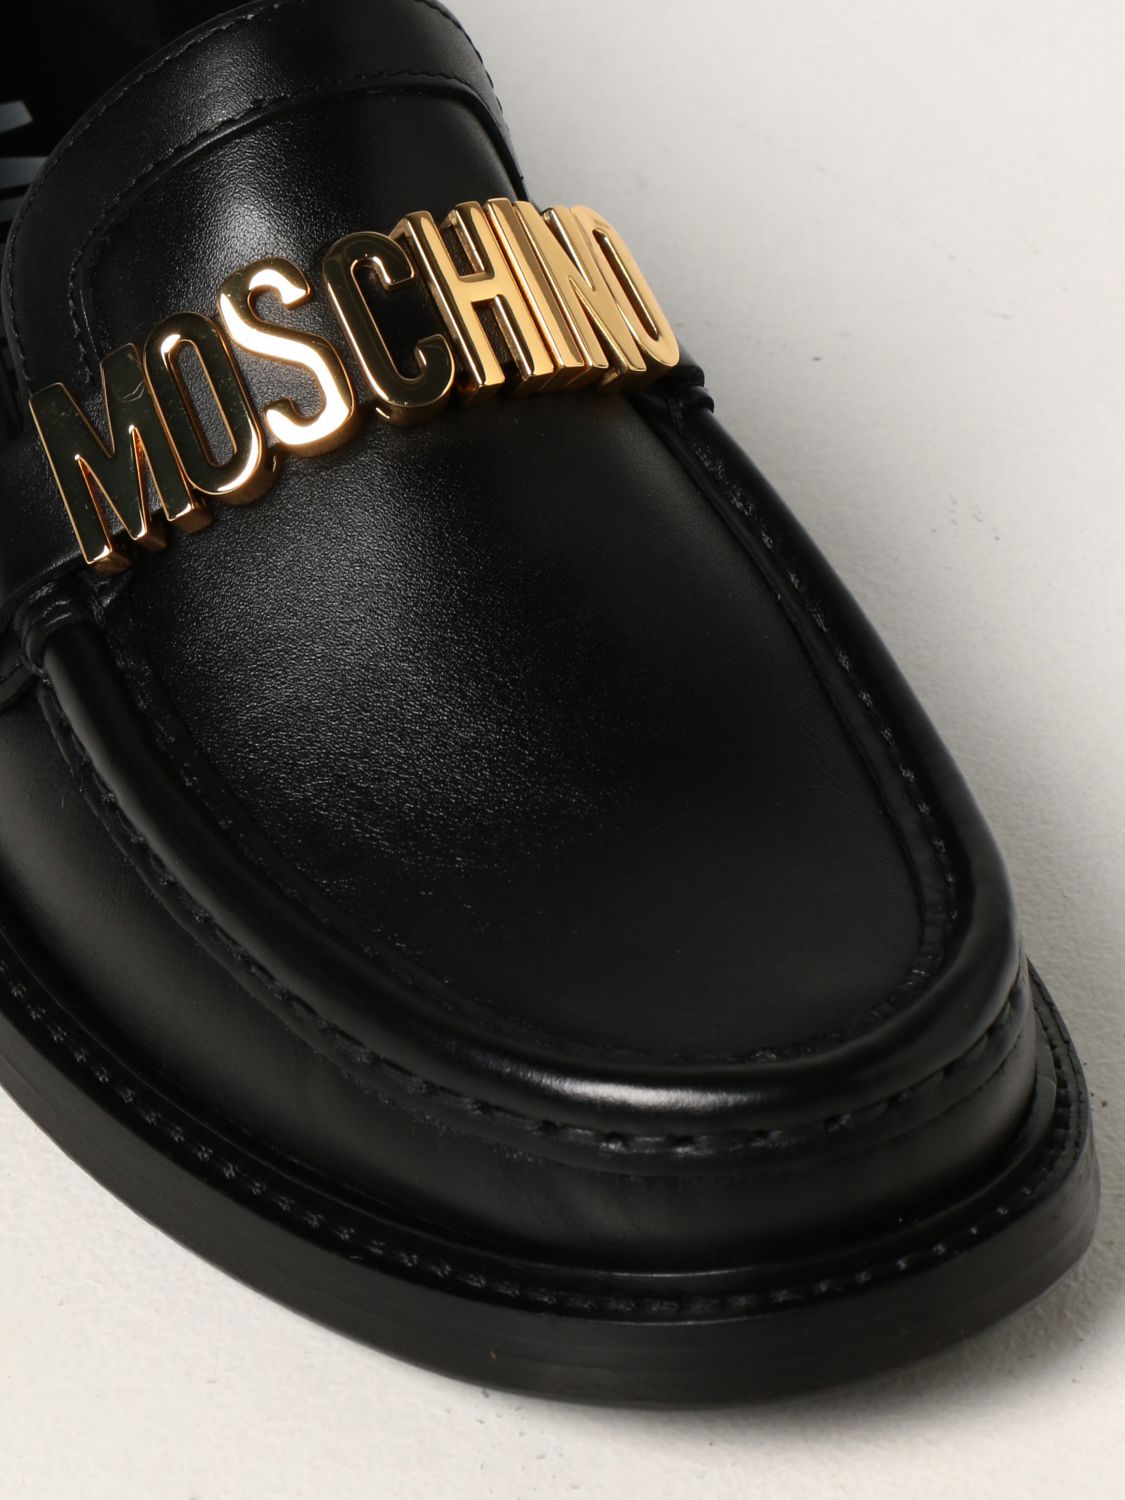 Mocassins Moschino Couture: Chaussures femme Moschino Couture noir 4